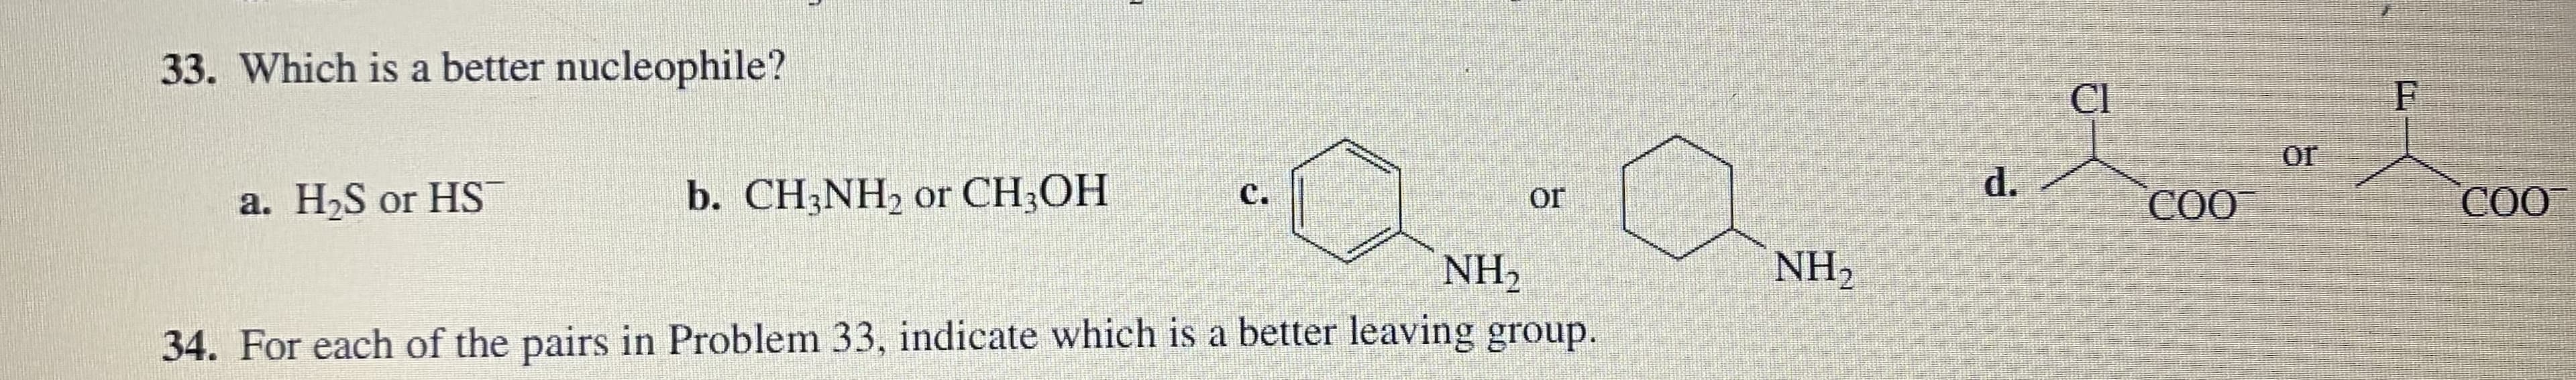 33. Which is a better nucleophile?
Cl
F
or
d.
b. CH3NH2 or CH;OH
СО
a. H,S or HS
C.
CO
or
NH2
NH2
34. For each of the pairs in Problem 33, indicate which is a better leaving group.
